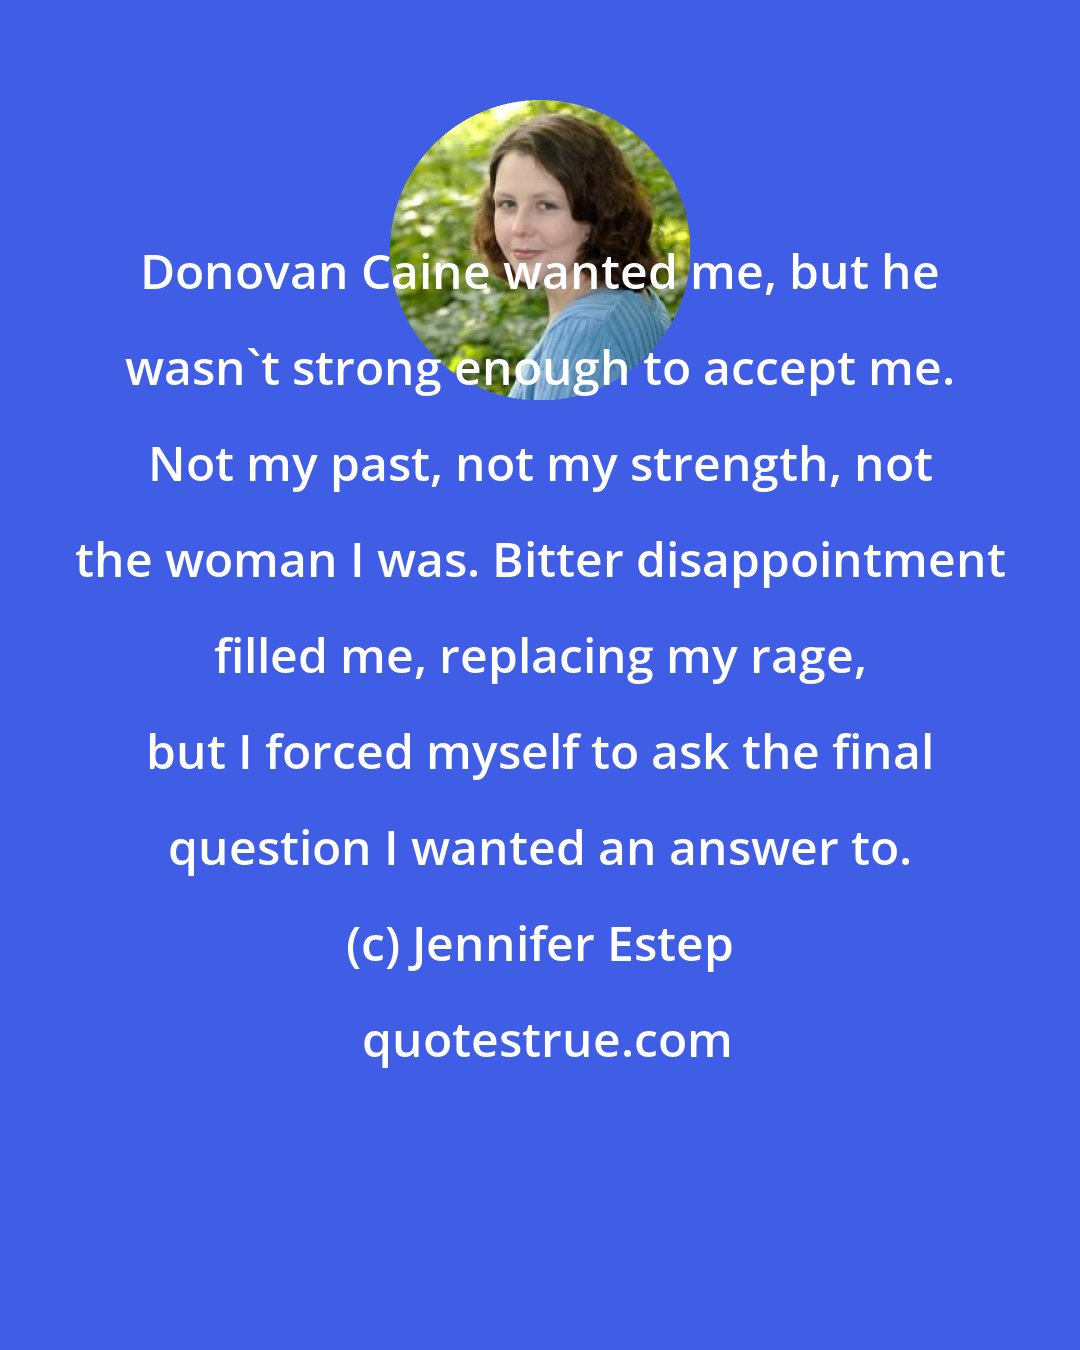 Jennifer Estep: Donovan Caine wanted me, but he wasn't strong enough to accept me. Not my past, not my strength, not the woman I was. Bitter disappointment filled me, replacing my rage, but I forced myself to ask the final question I wanted an answer to.